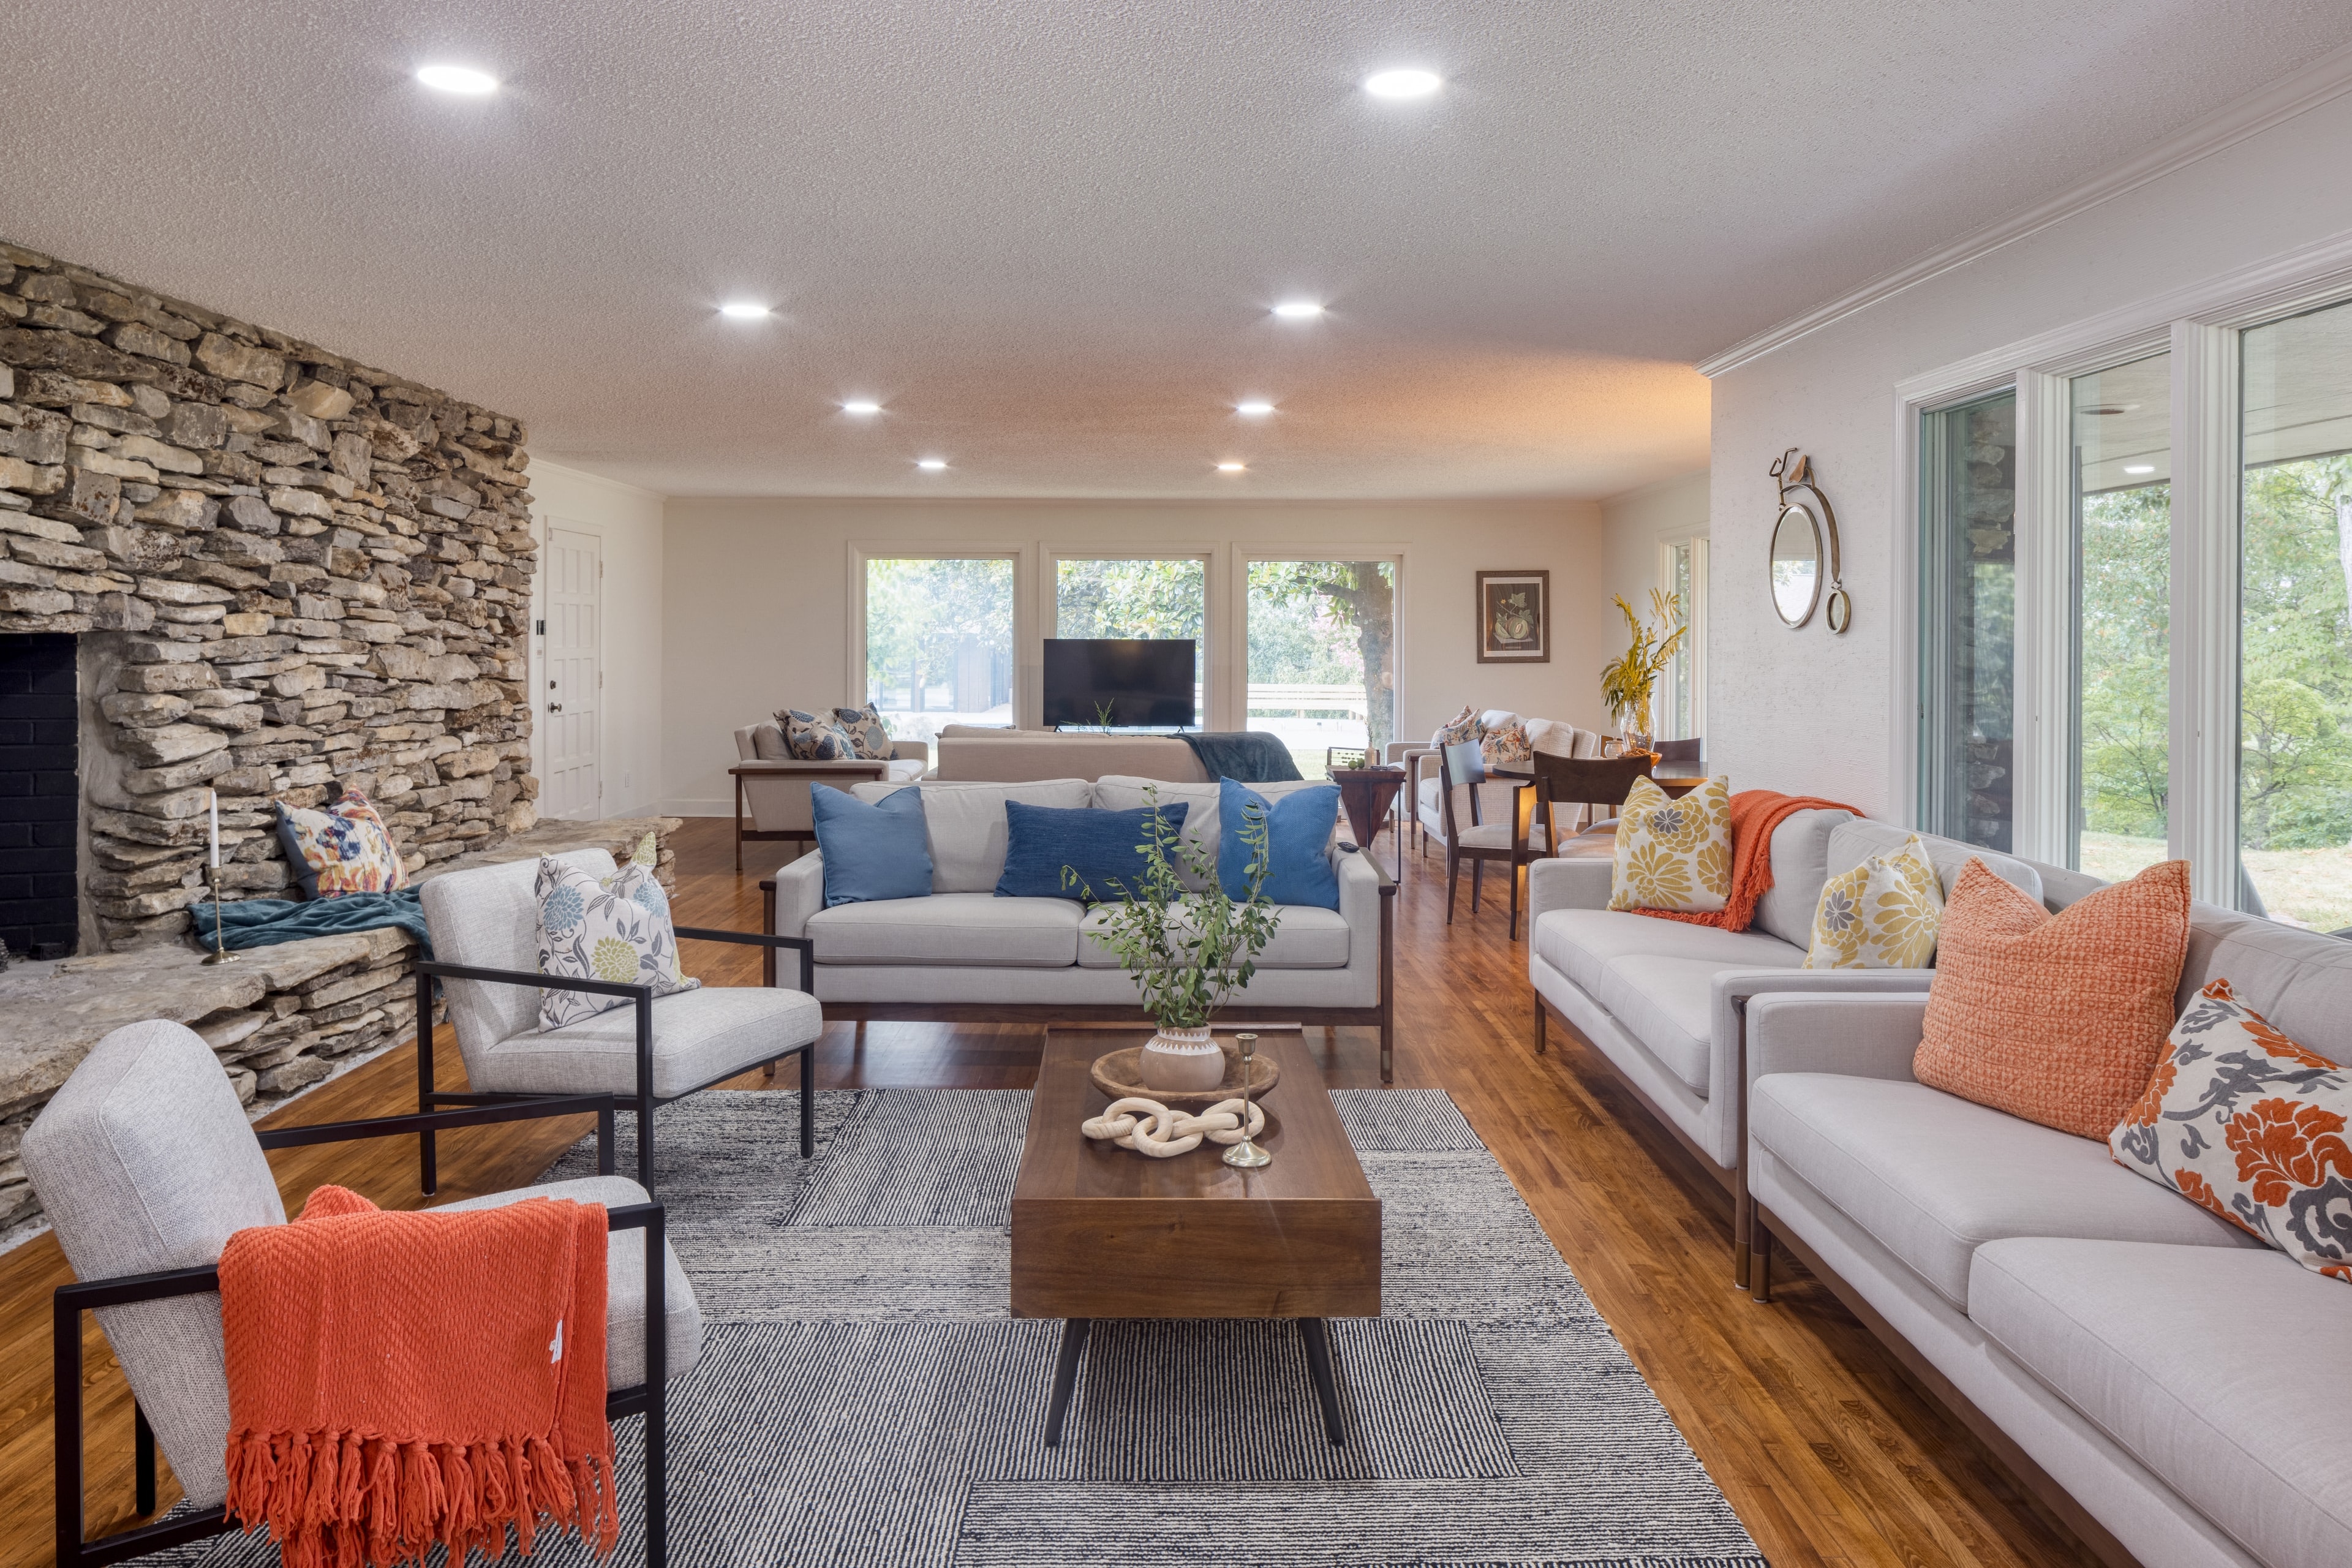 Whether you're spending time with loved ones or enjoying a moment of solitude, this living room is sure to make you feel at home.